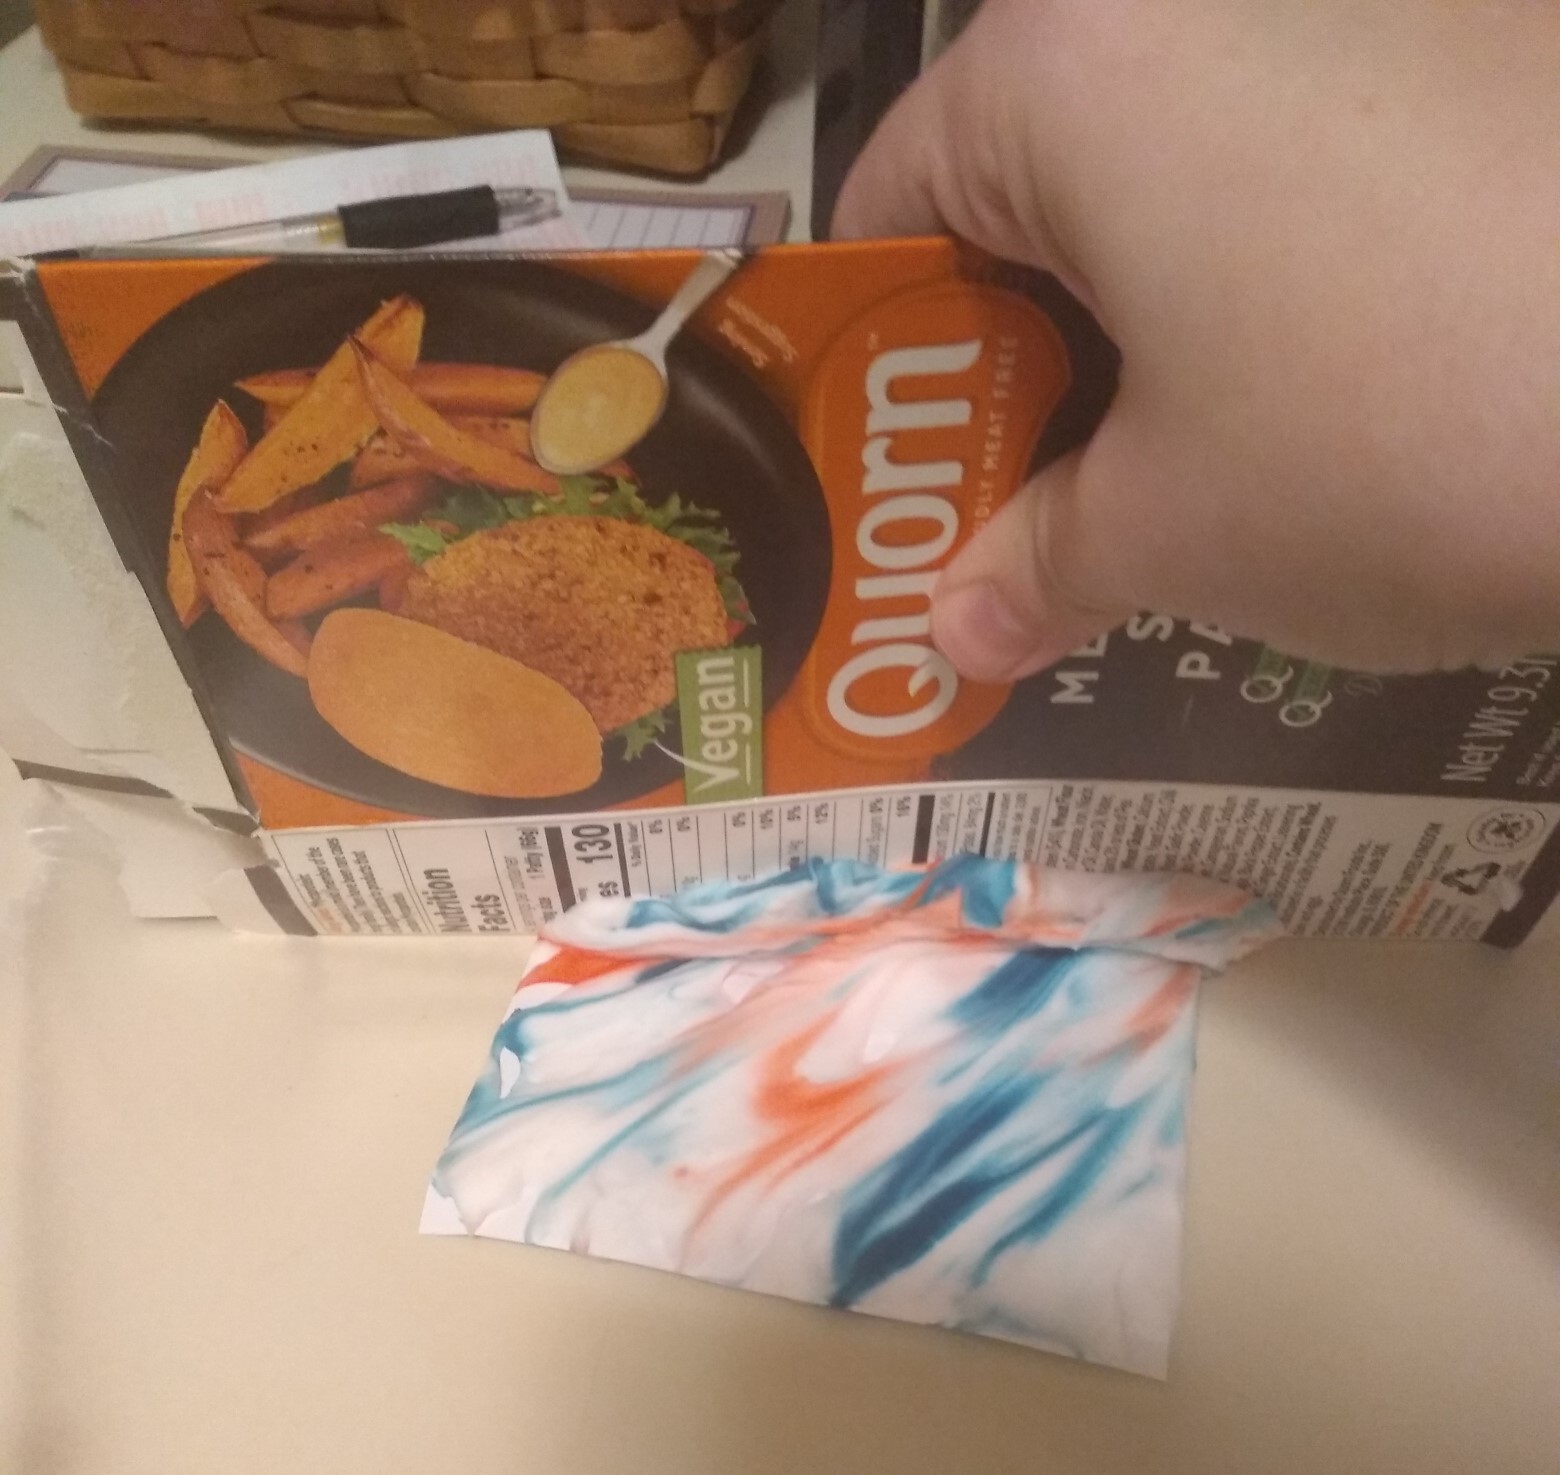 Scraping shaving cream off the paper with a piece of cardboard.